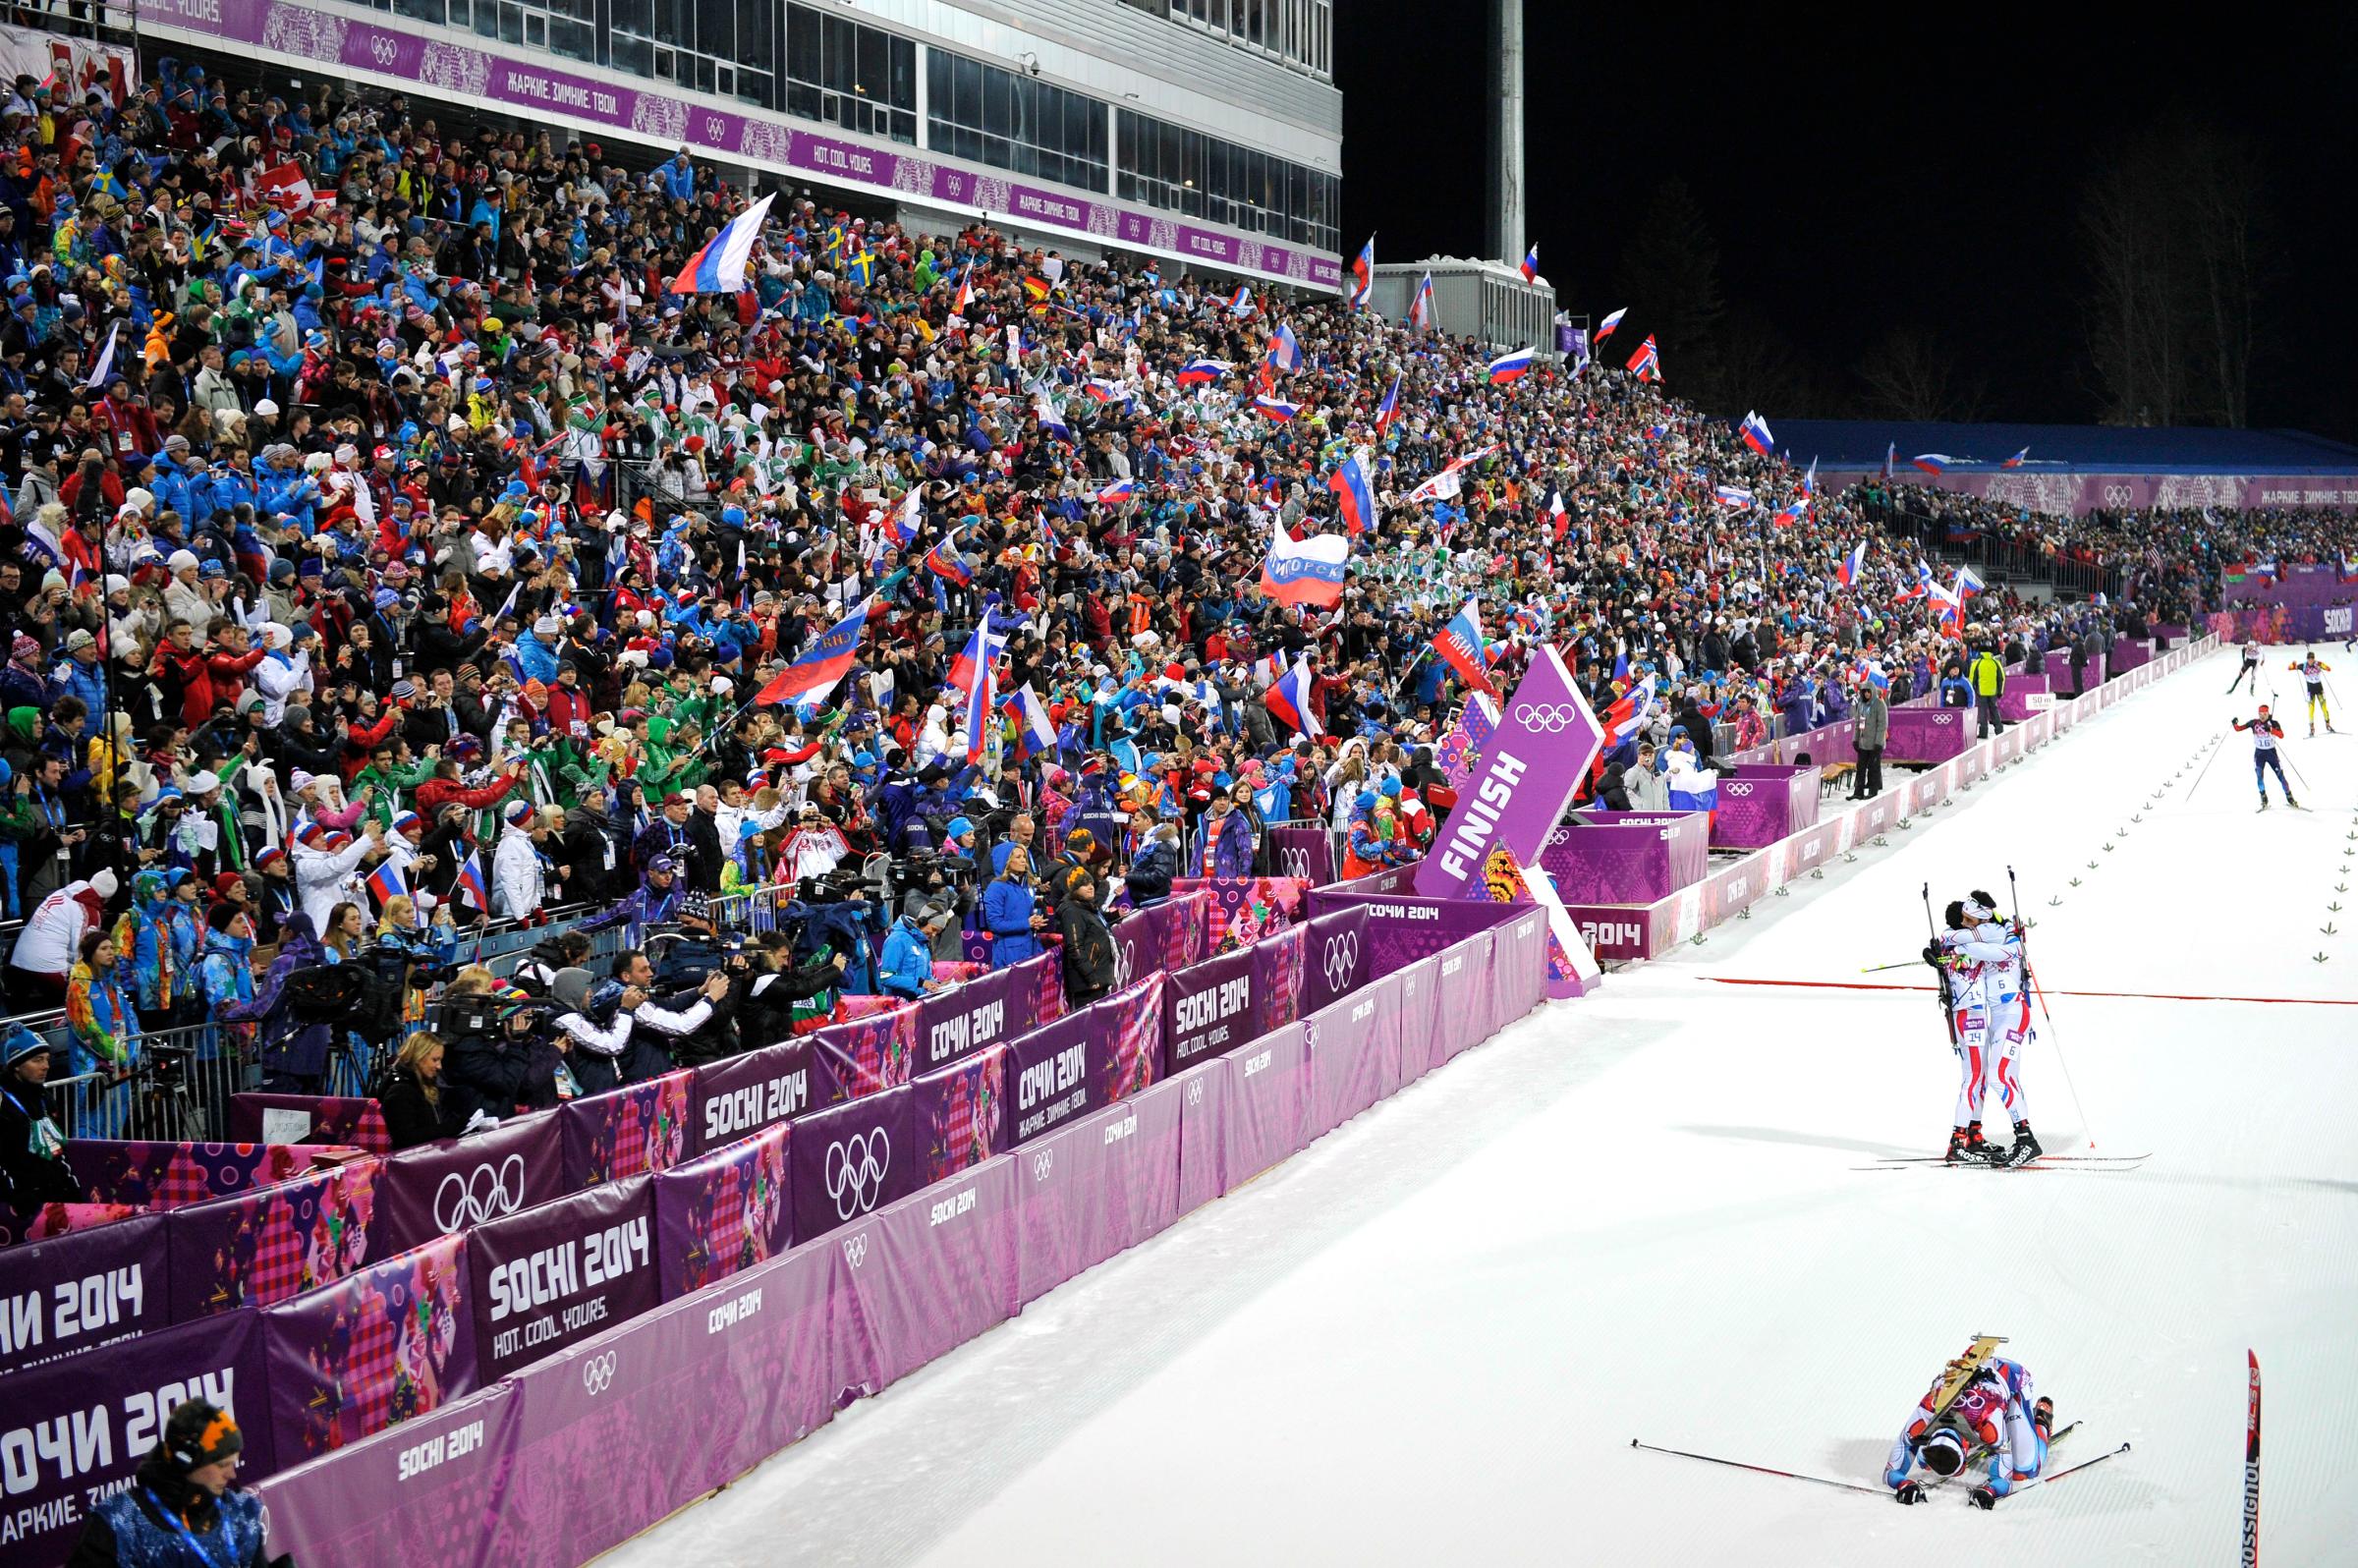 Gold medalist Martin Fourcade and bronze medalist Jean Guillaume Beatrix, both of France, celebrate while silver medalist Ondrej Moravec of the Czech Republic lies on the ground in the finish area of the Biathlon Men's 12.5km Pursuit at the Laura Cross-country Ski &amp; Biathlon Center.